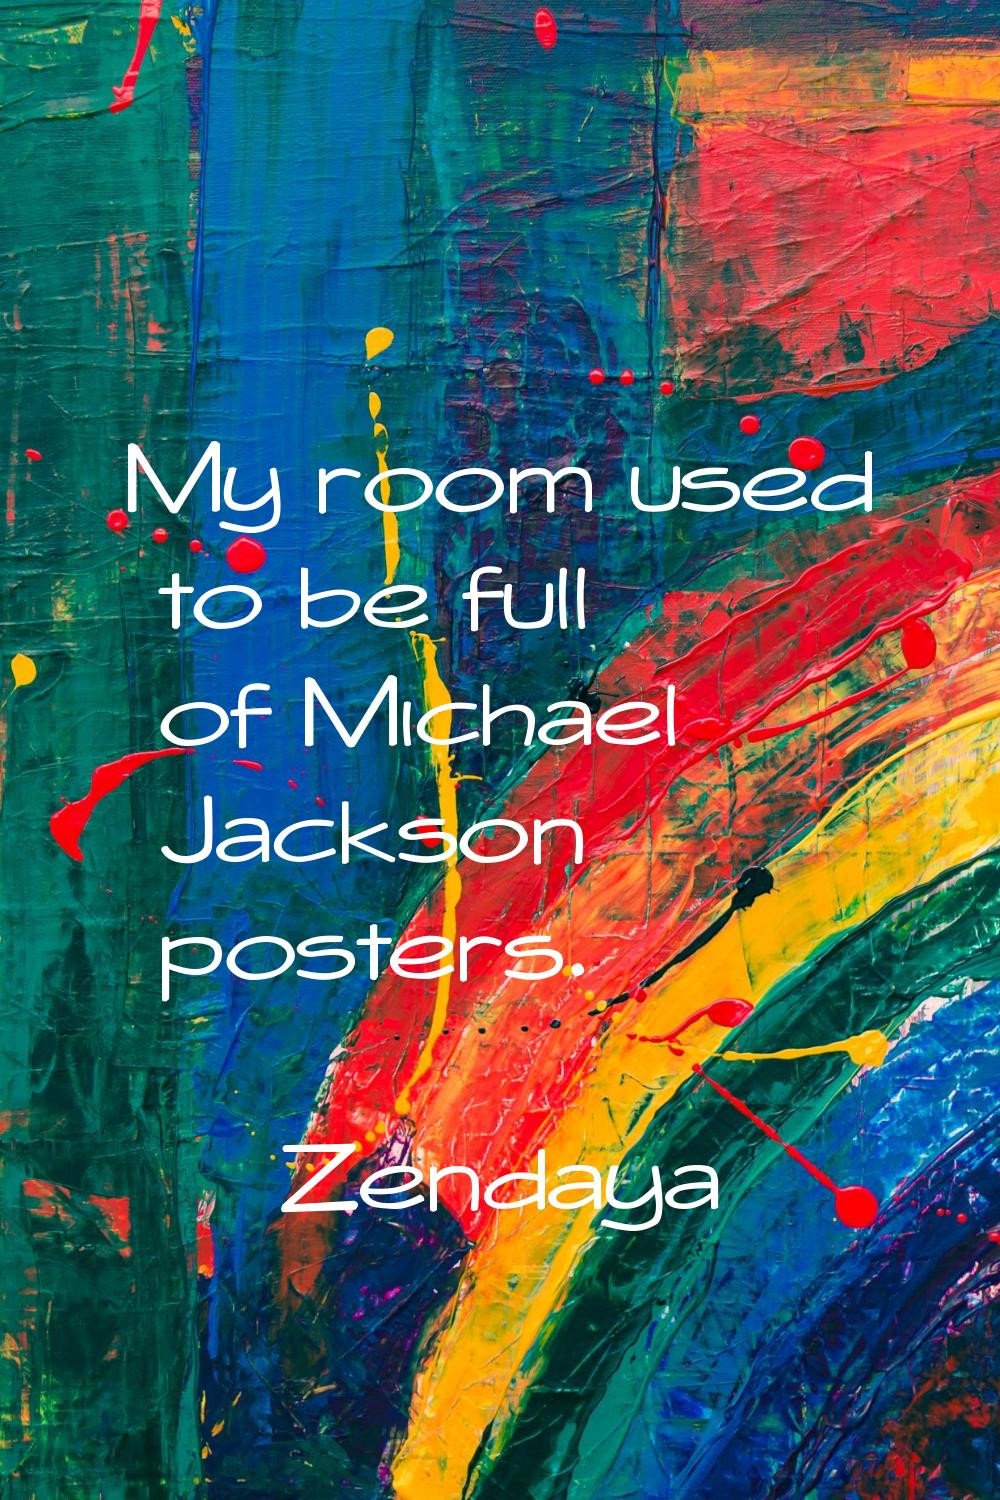 My room used to be full of Michael Jackson posters.